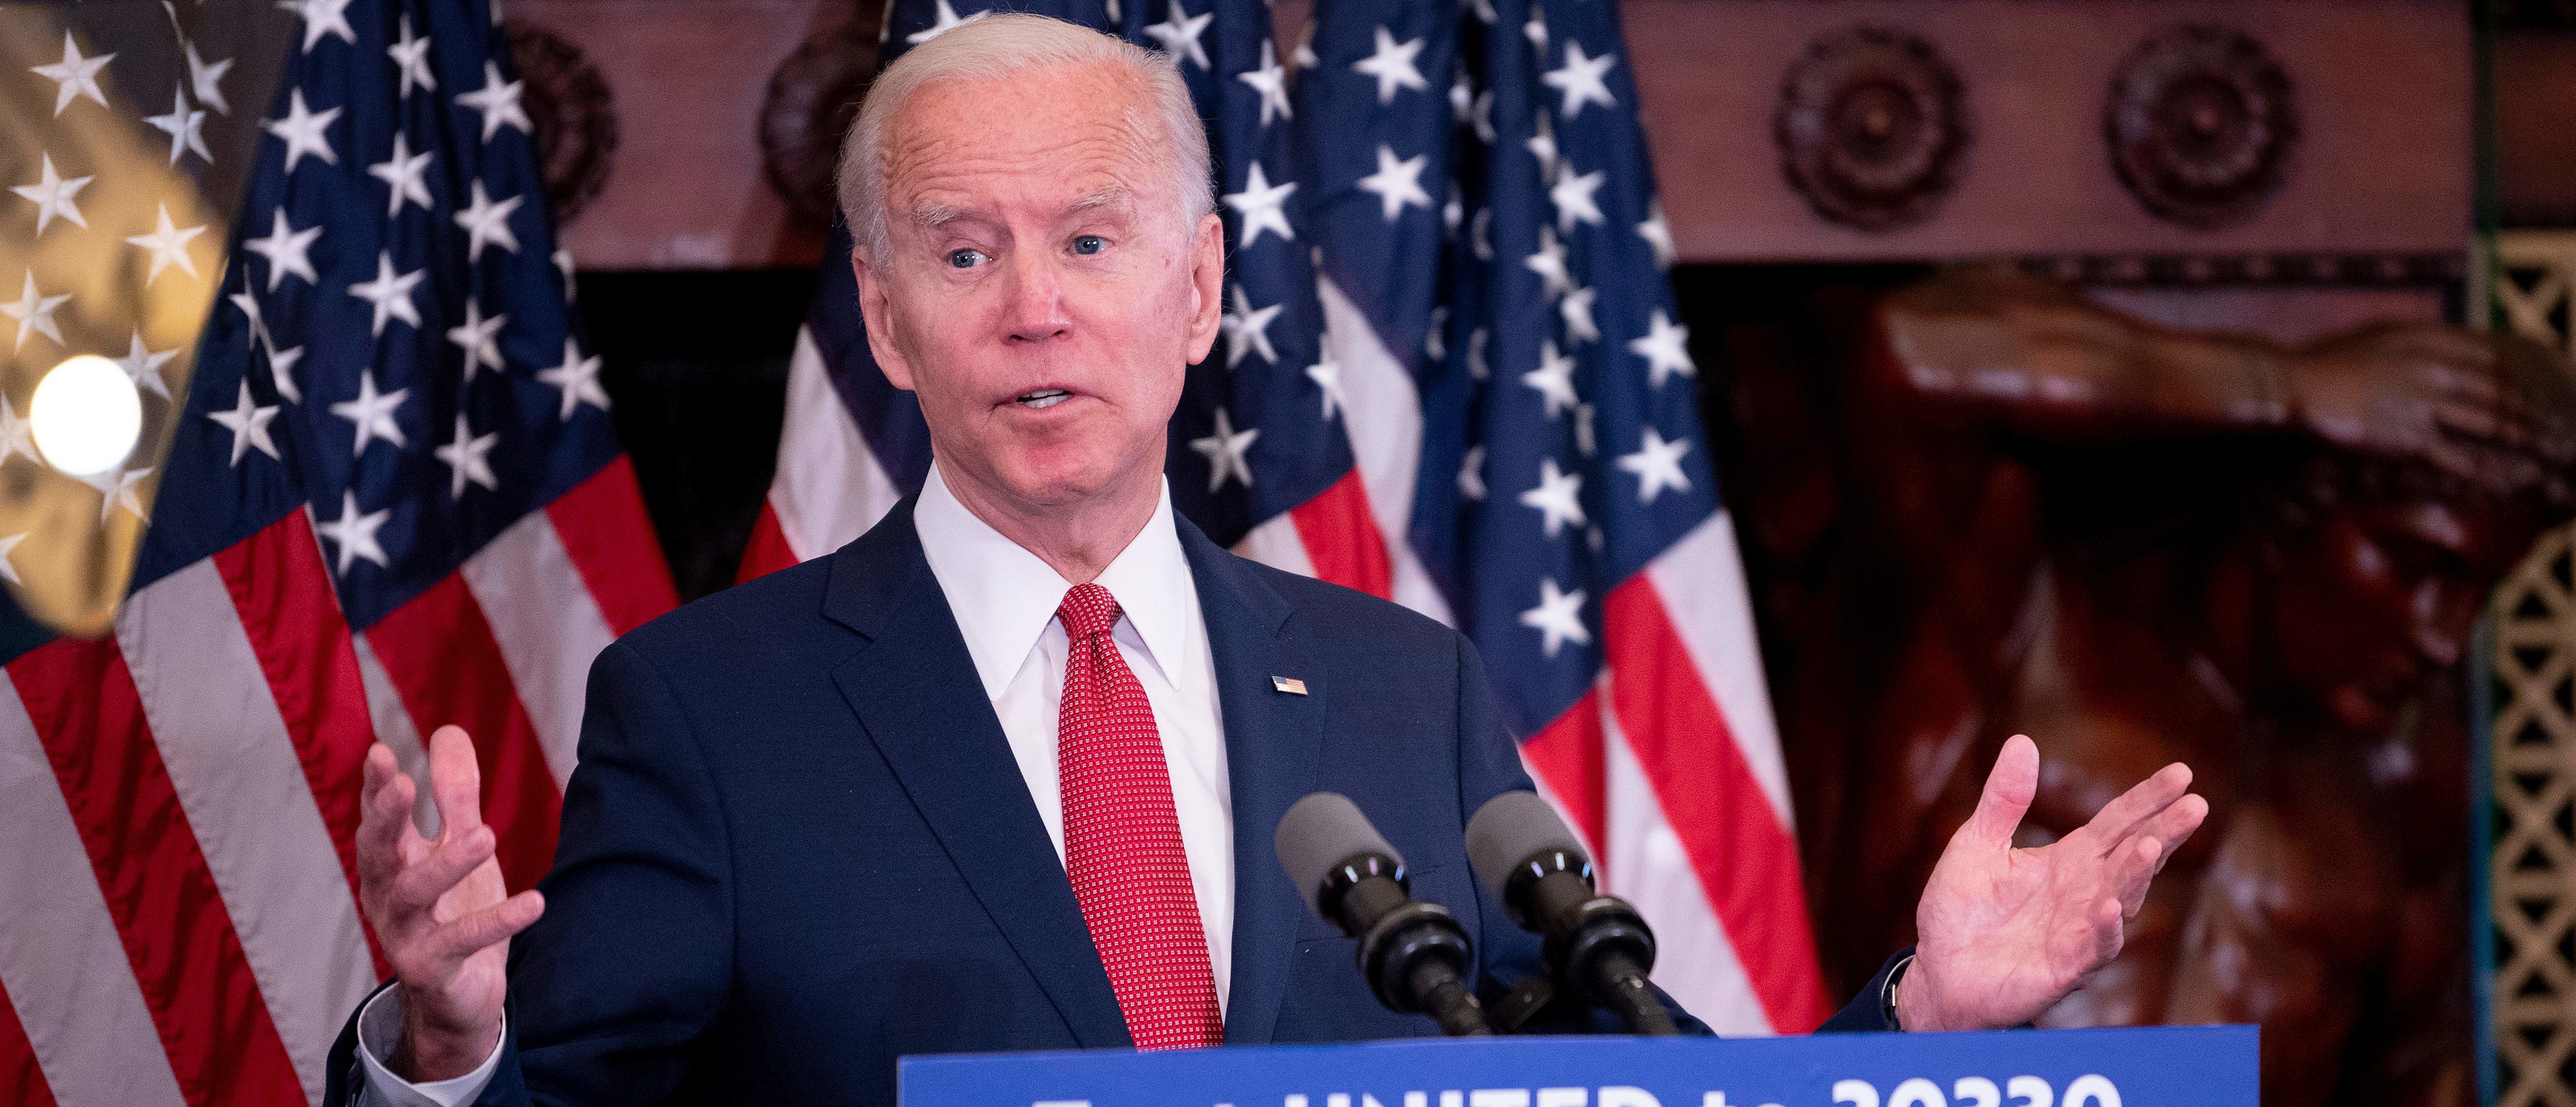 Former vice president and Democratic presidential candidate Joe Biden speaks about the unrest across the country from Philadelphia City Hall on June 2, 2020, in Philadelphia, Pennsylvania, contrasting his leadership style with that of US President Donald Trump, and calling George Floyd's death "a wake-up call for our nation." (Photo by JIM WATSON/AFP via Getty Images)